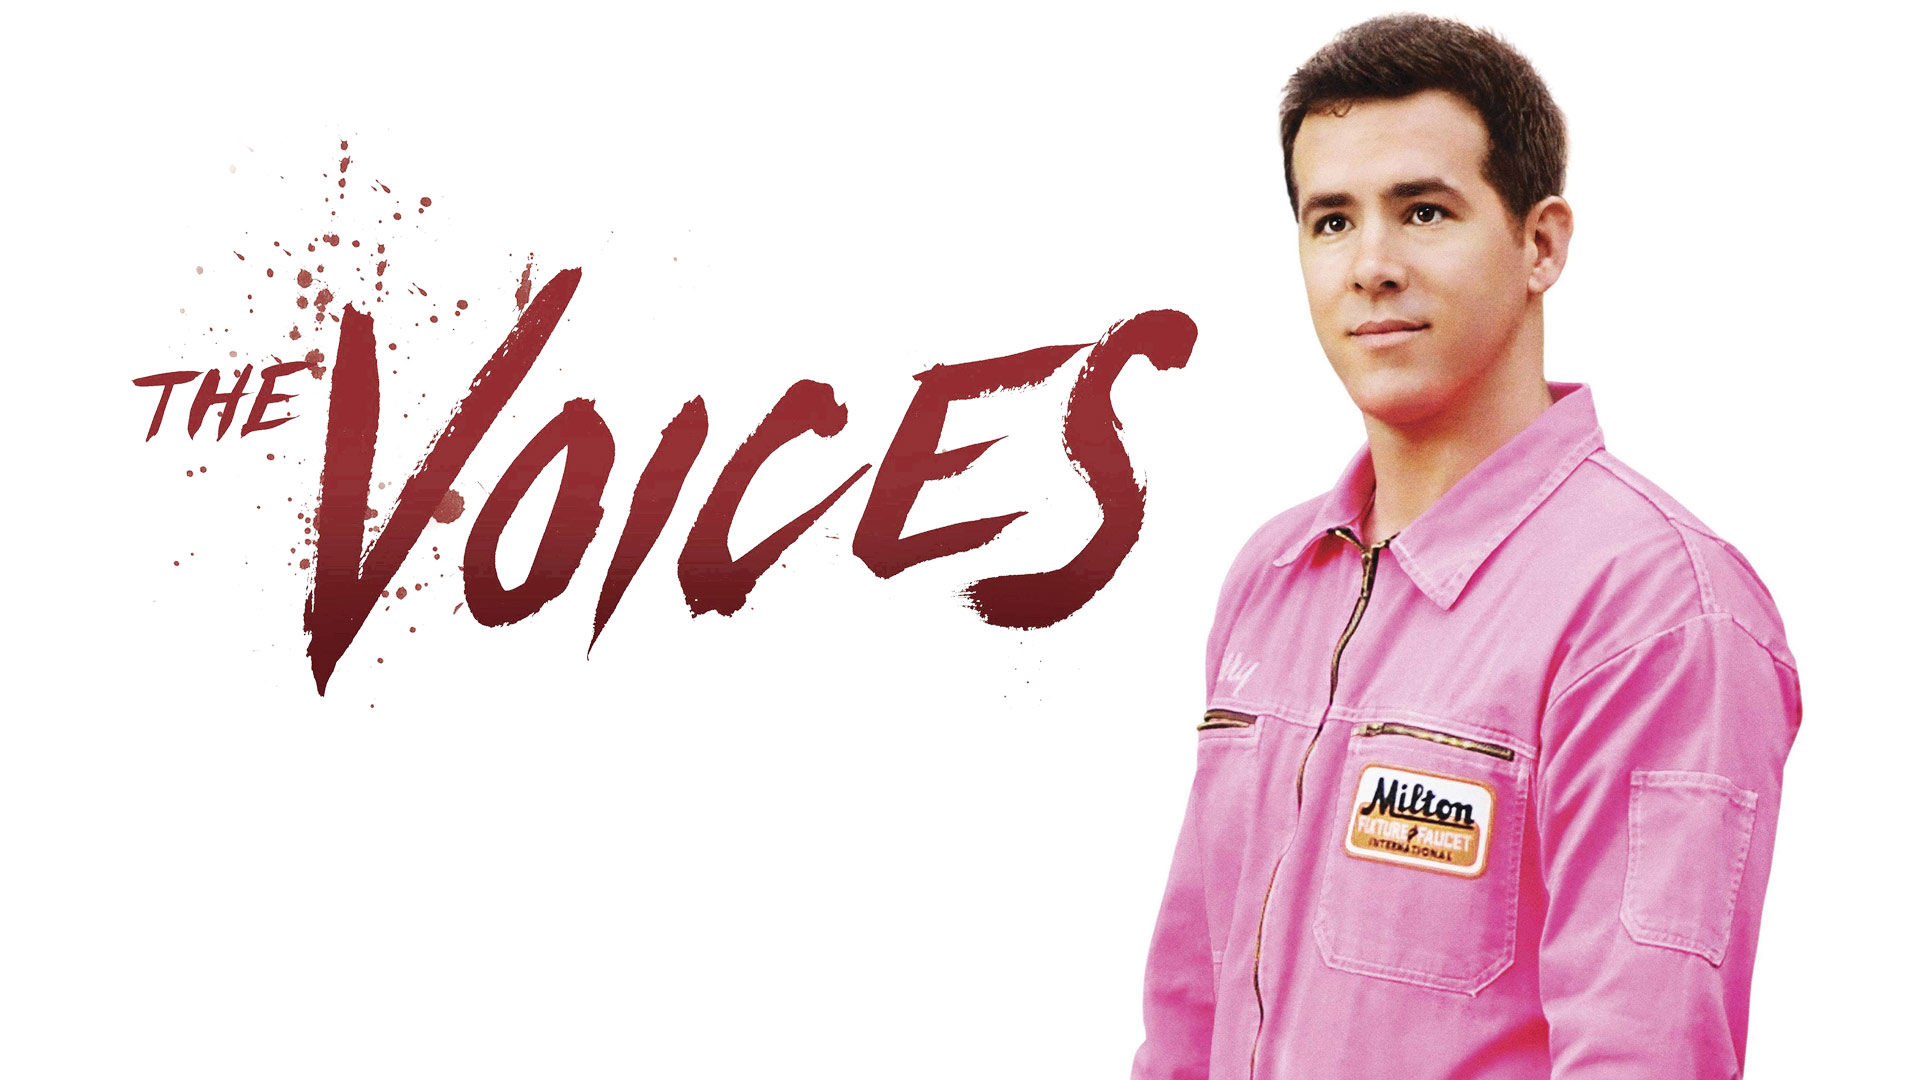 48-facts-about-the-movie-the-voices